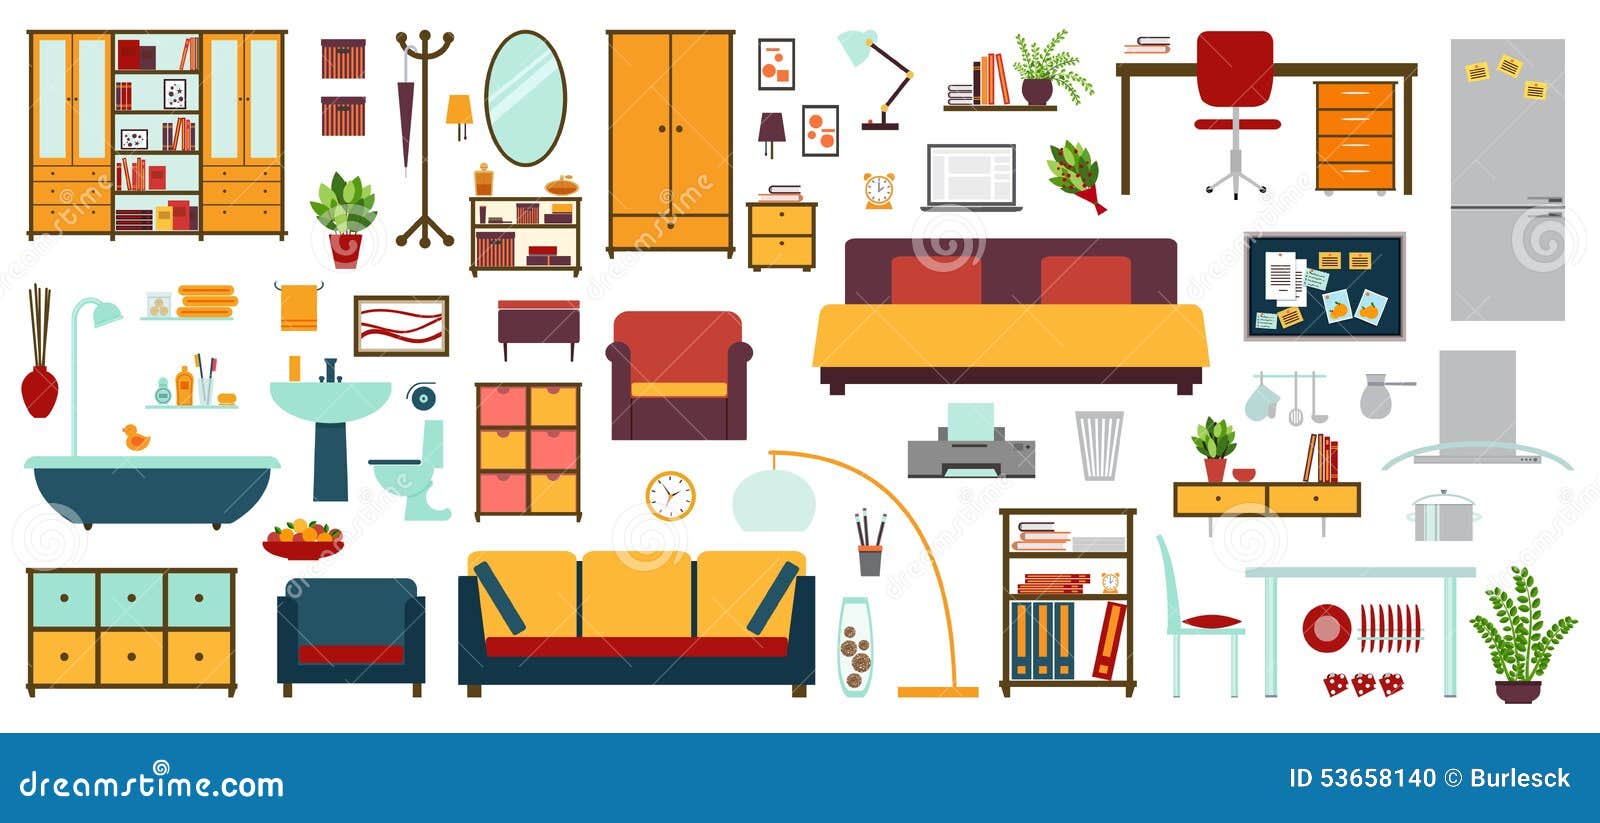 furniture icons in flat style for house